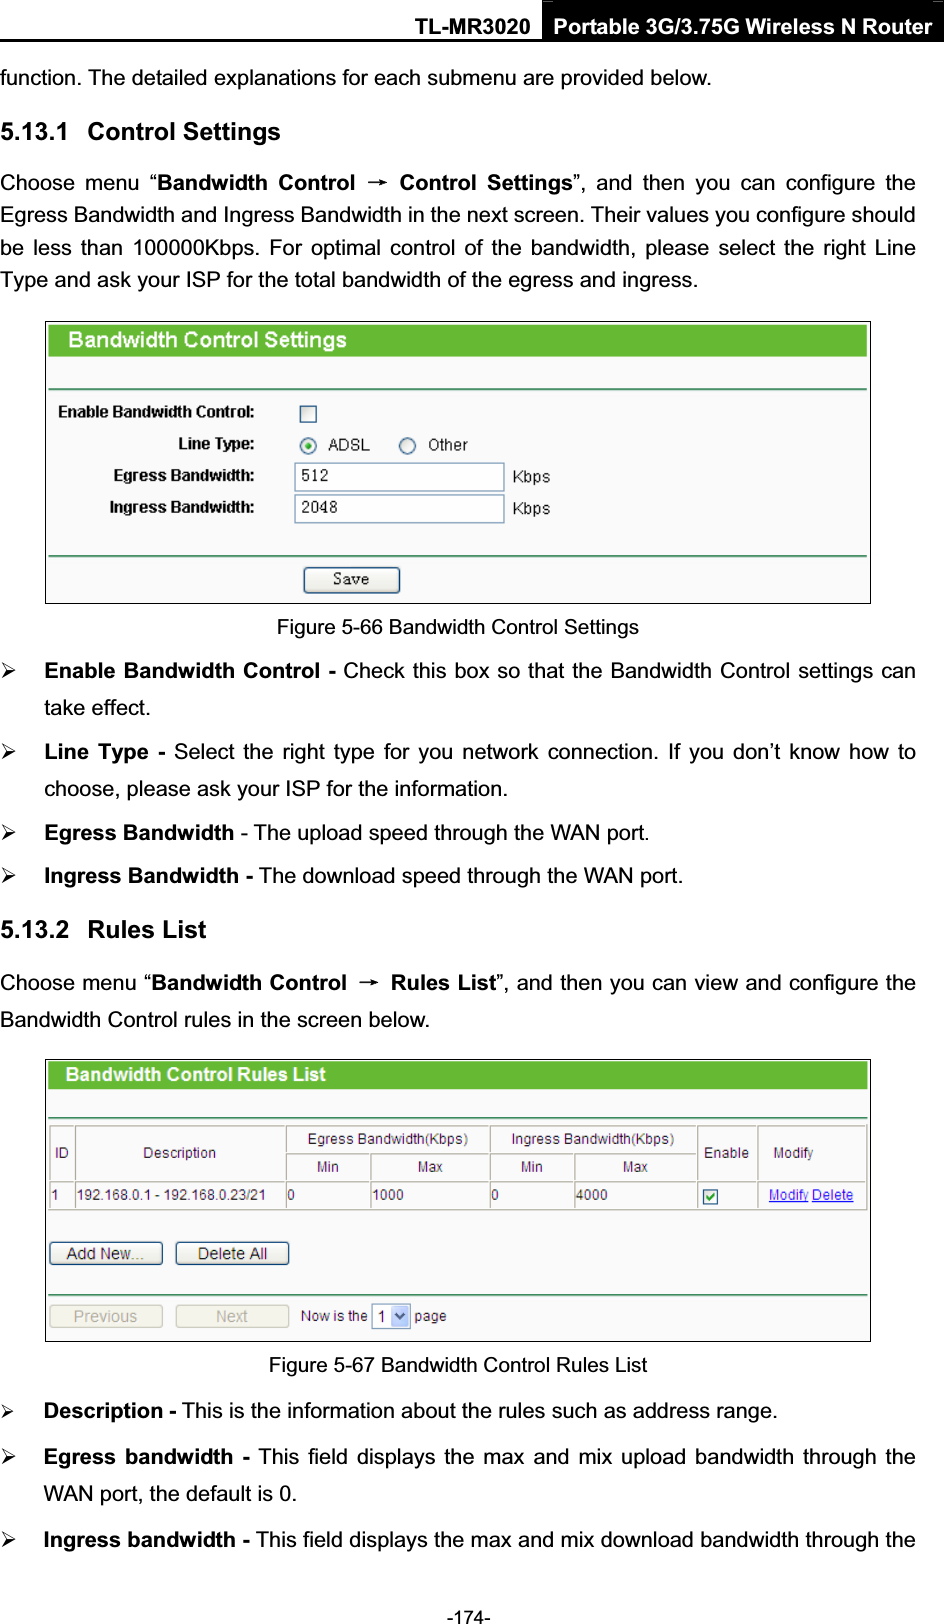 TL-MR3020 Portable 3G/3.75G Wireless N Router-174-function. The detailed explanations for each submenu are provided below. 5.13.1 Control Settings Choose  menu  “Bandwidth  Control  ė  Control  Settings”,  and  then  you  can  configure  the Egress Bandwidth and Ingress Bandwidth in the next screen. Their values you configure should be less  than  100000Kbps. For  optimal  control  of  the  bandwidth, please  select the  right  Line Type and ask your ISP for the total bandwidth of the egress and ingress.Figure 5-66 Bandwidth Control Settings ¾Enable Bandwidth Control - Check this box so that the Bandwidth Control settings can take effect.¾Line  Type -  Select the  right  type for  you network  connection. If  you  don’t  know how  to choose, please ask your ISP for the information.¾Egress Bandwidth - The upload speed through the WAN port.¾Ingress Bandwidth - The download speed through the WAN port.5.13.2 Rules List Choose menu “Bandwidth Control  ė  Rules List”, and then you can view and configure the Bandwidth Control rules in the screen below. Figure 5-67 Bandwidth Control Rules List ¾Description - This is the information about the rules such as address range.¾Egress  bandwidth  -  This  field  displays  the  max  and mix upload bandwidth through the WAN port, the default is 0. ¾Ingress bandwidth - This field displays the max and mix download bandwidth through the 